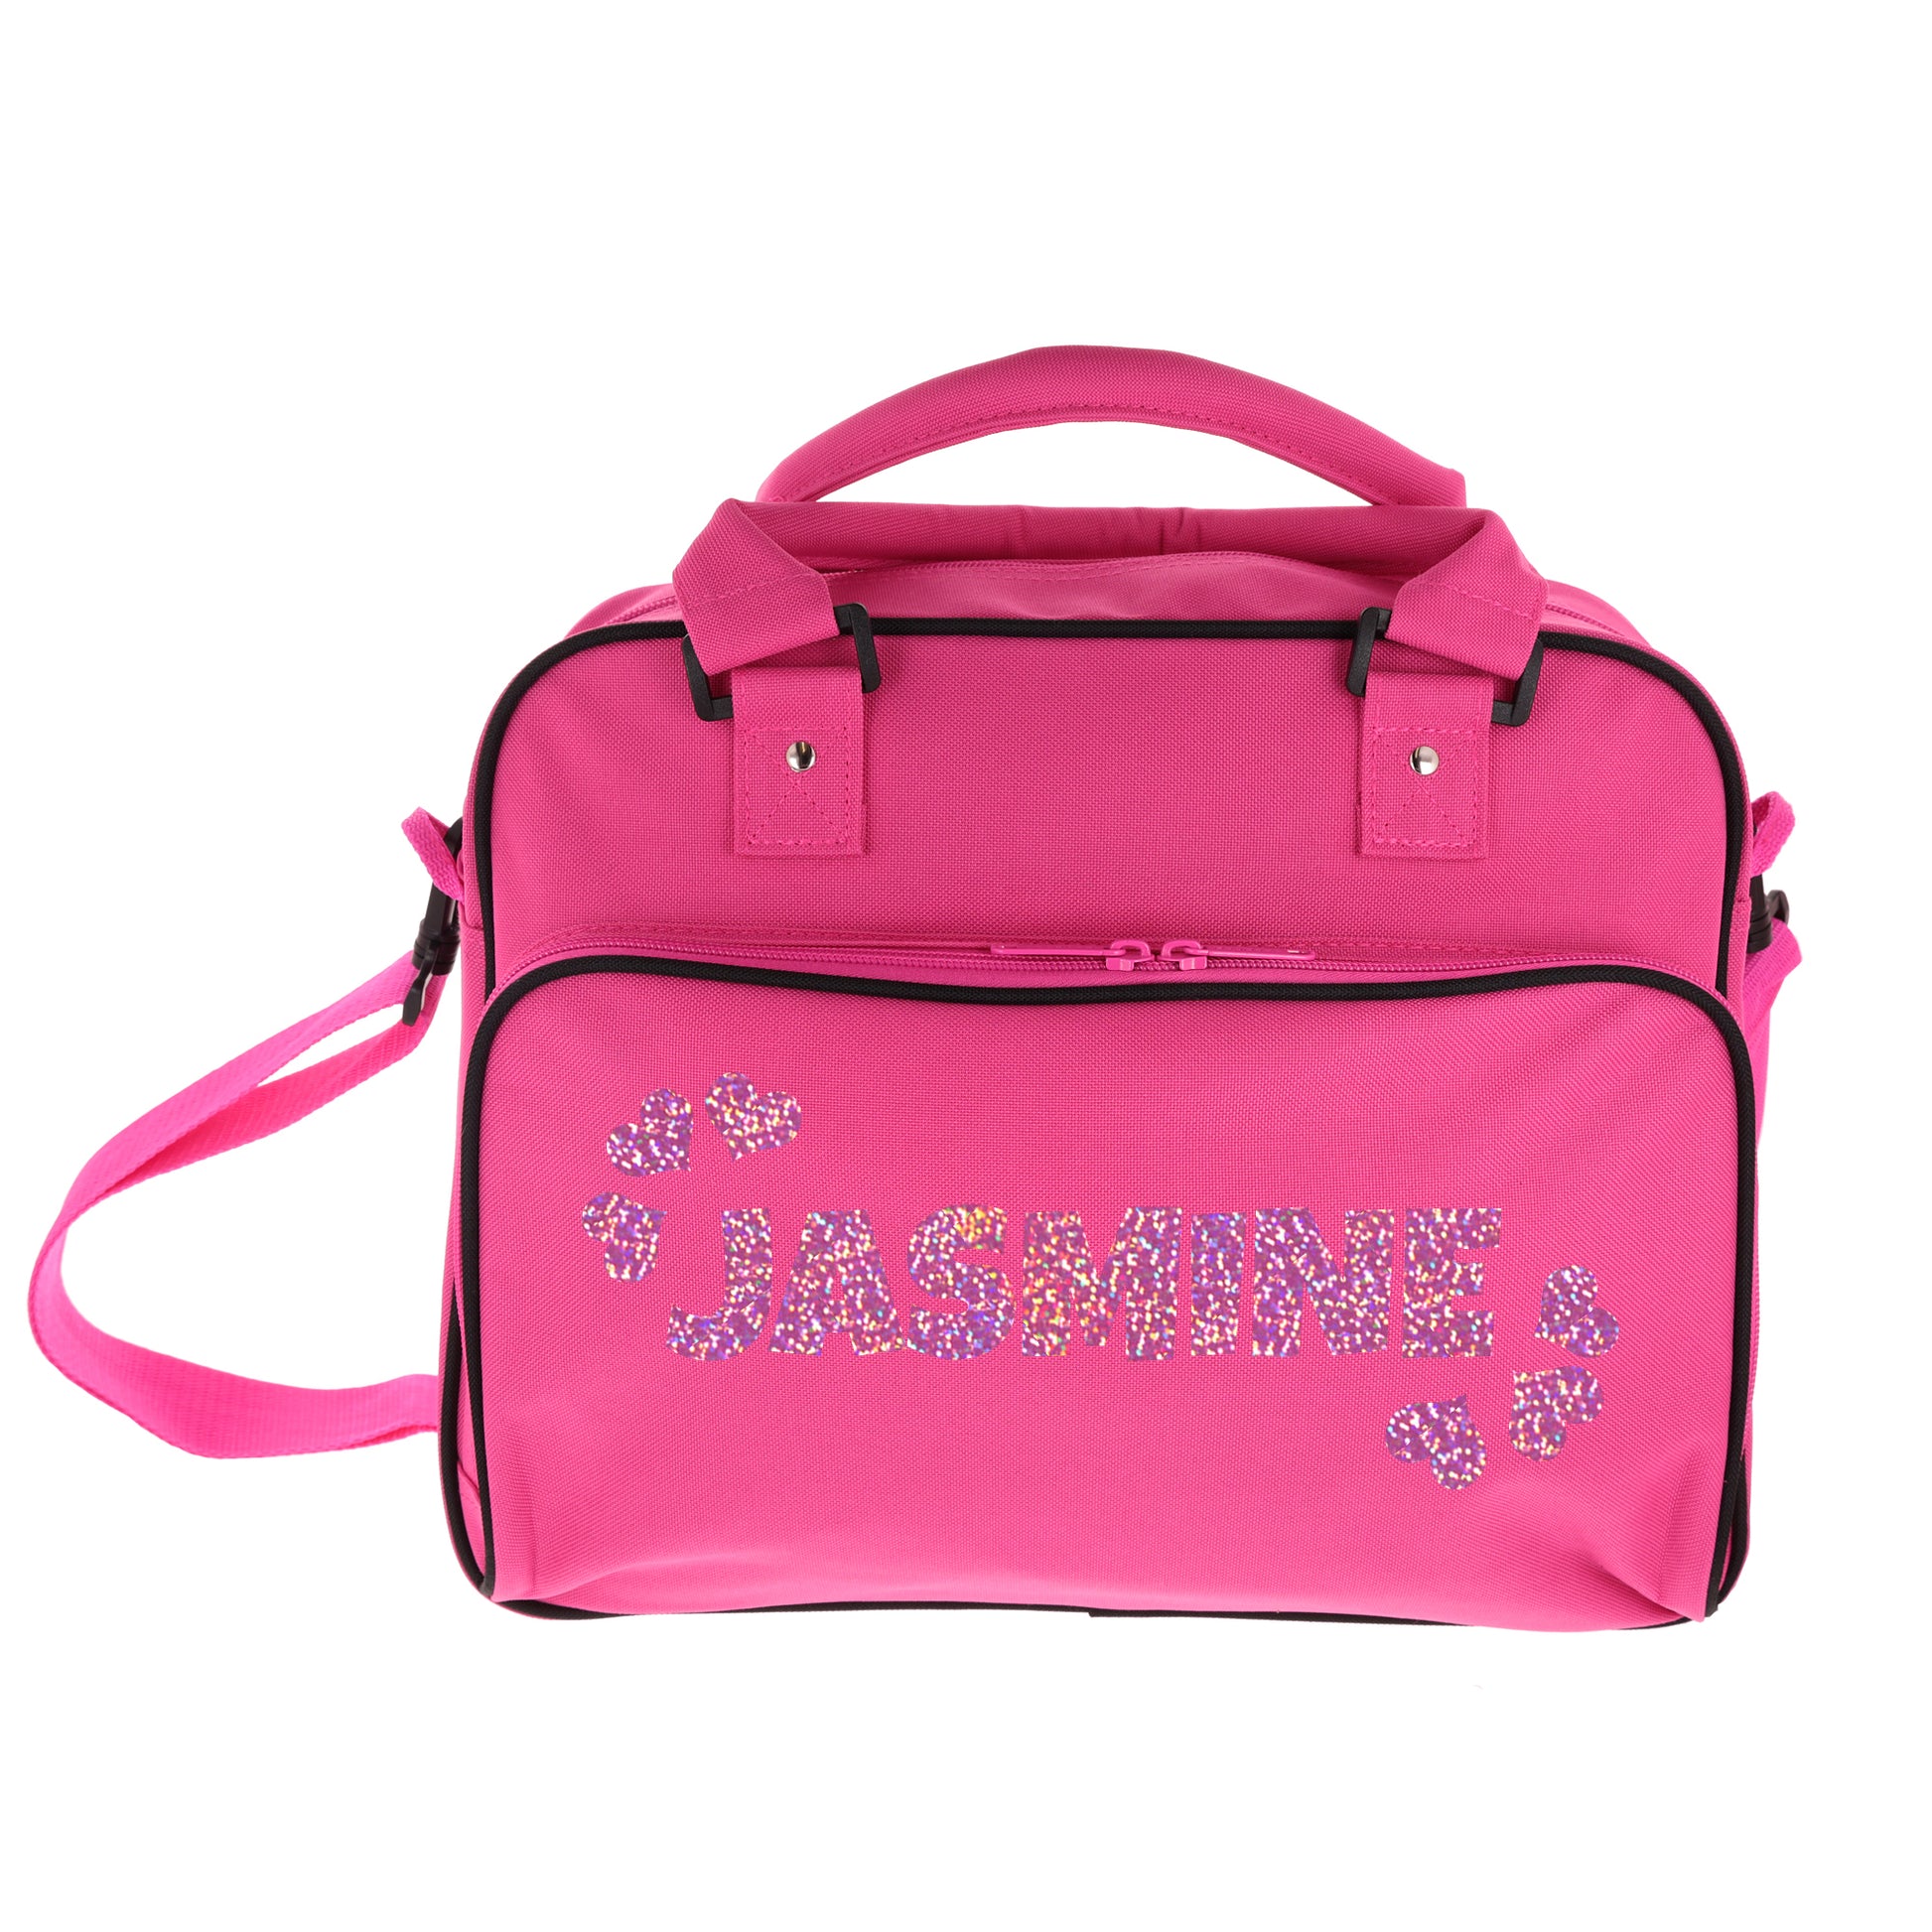 Personalised Girls Sports Bag with Name Dancing Swimming Gymnastic School Gym Bag  - Always Looking Good - Hot Pink Name & Hearts 